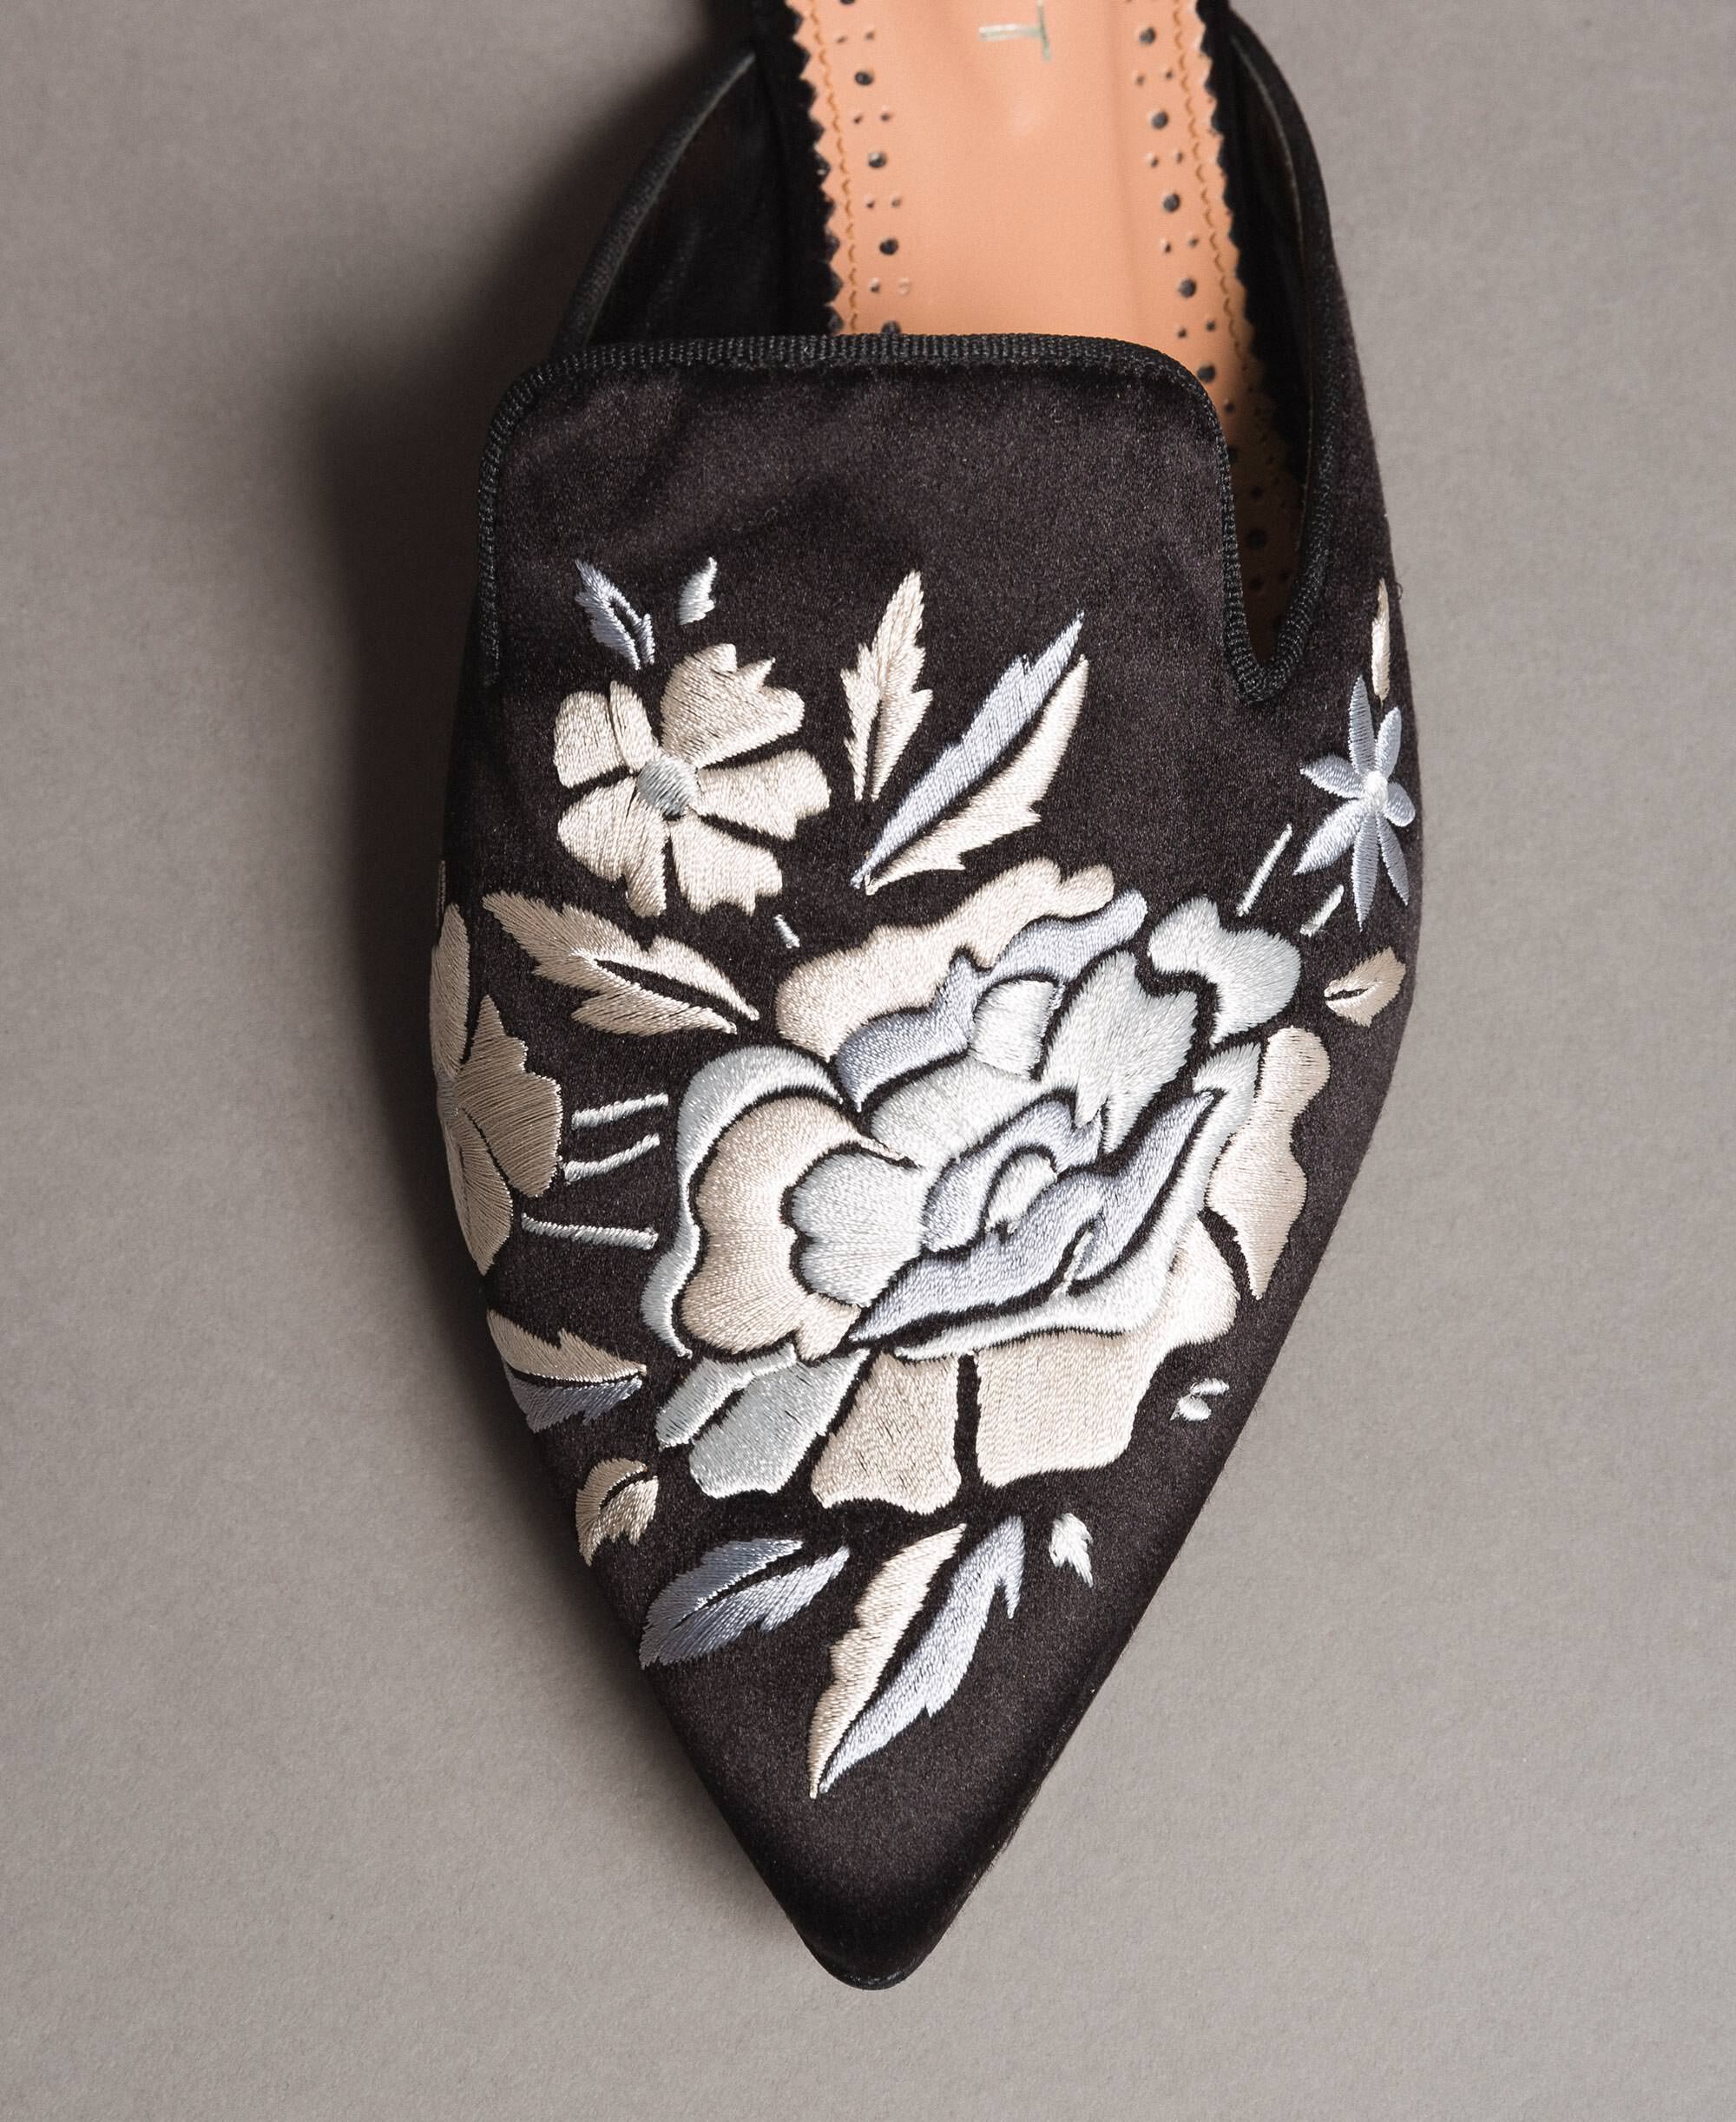 black embroidered mules